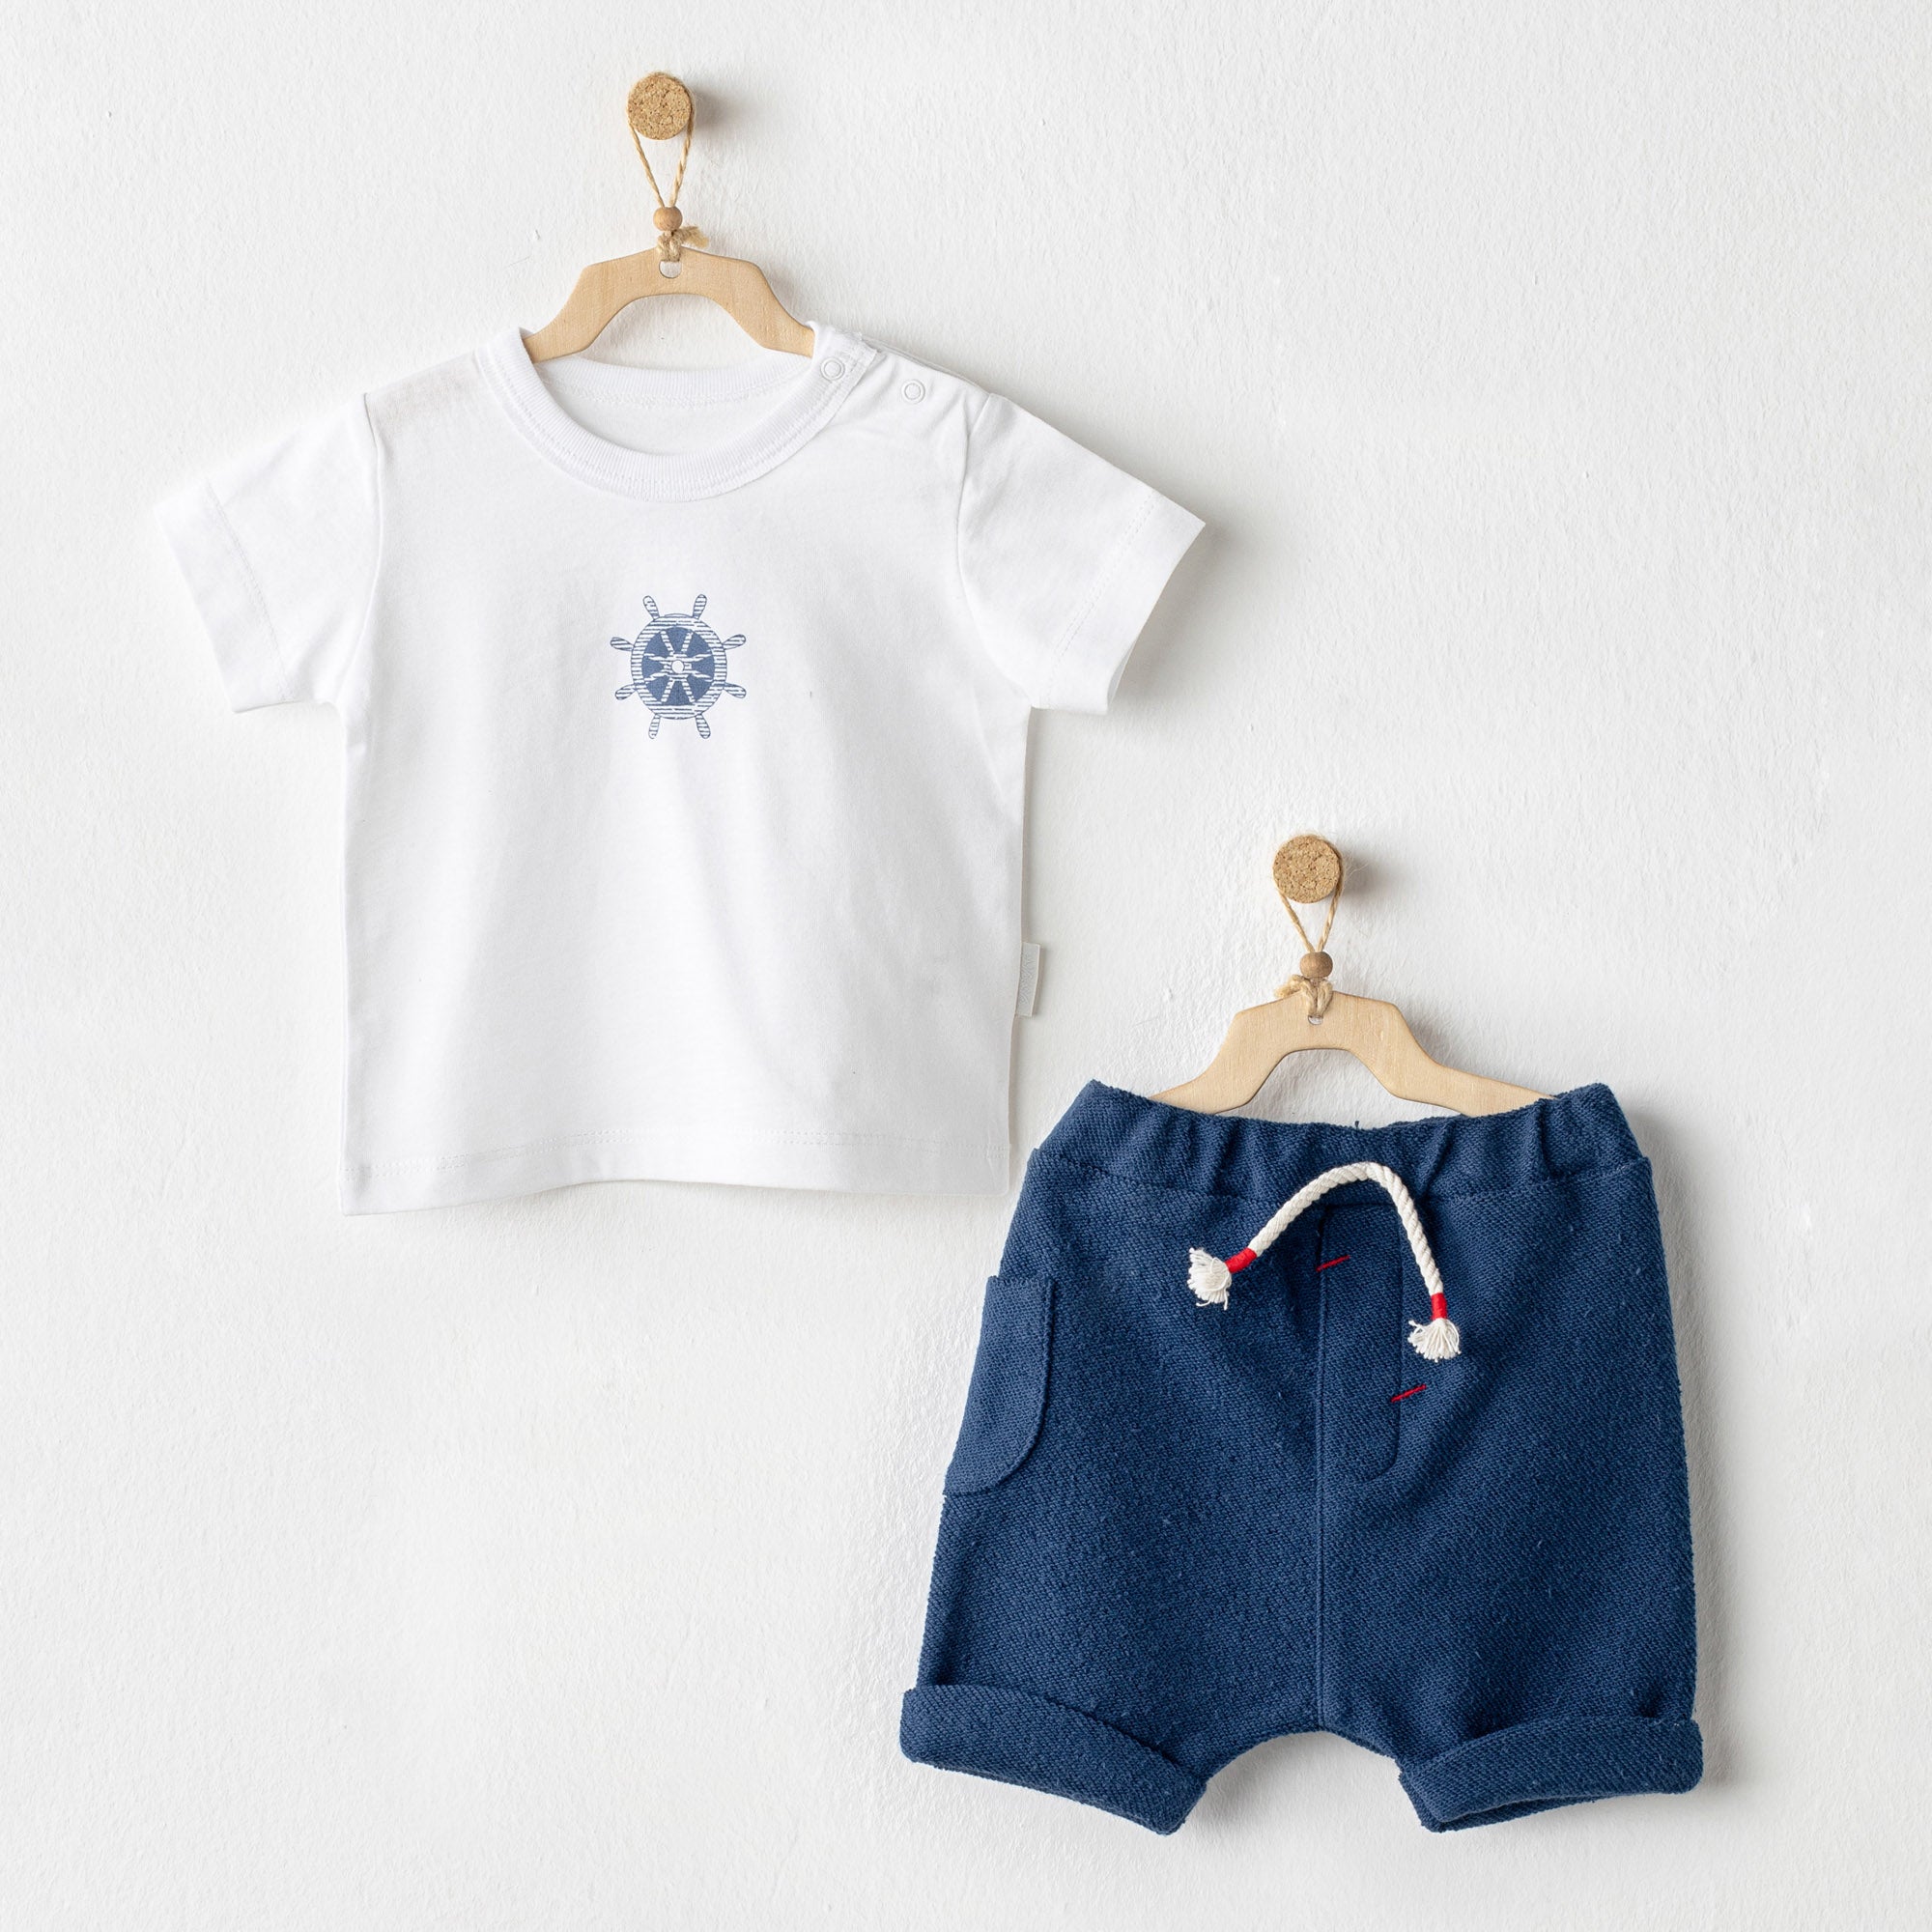 Marine Cotton Casual Set - Marine Cotton Casual Set - 1-3 Months - Andywawa - Melymod